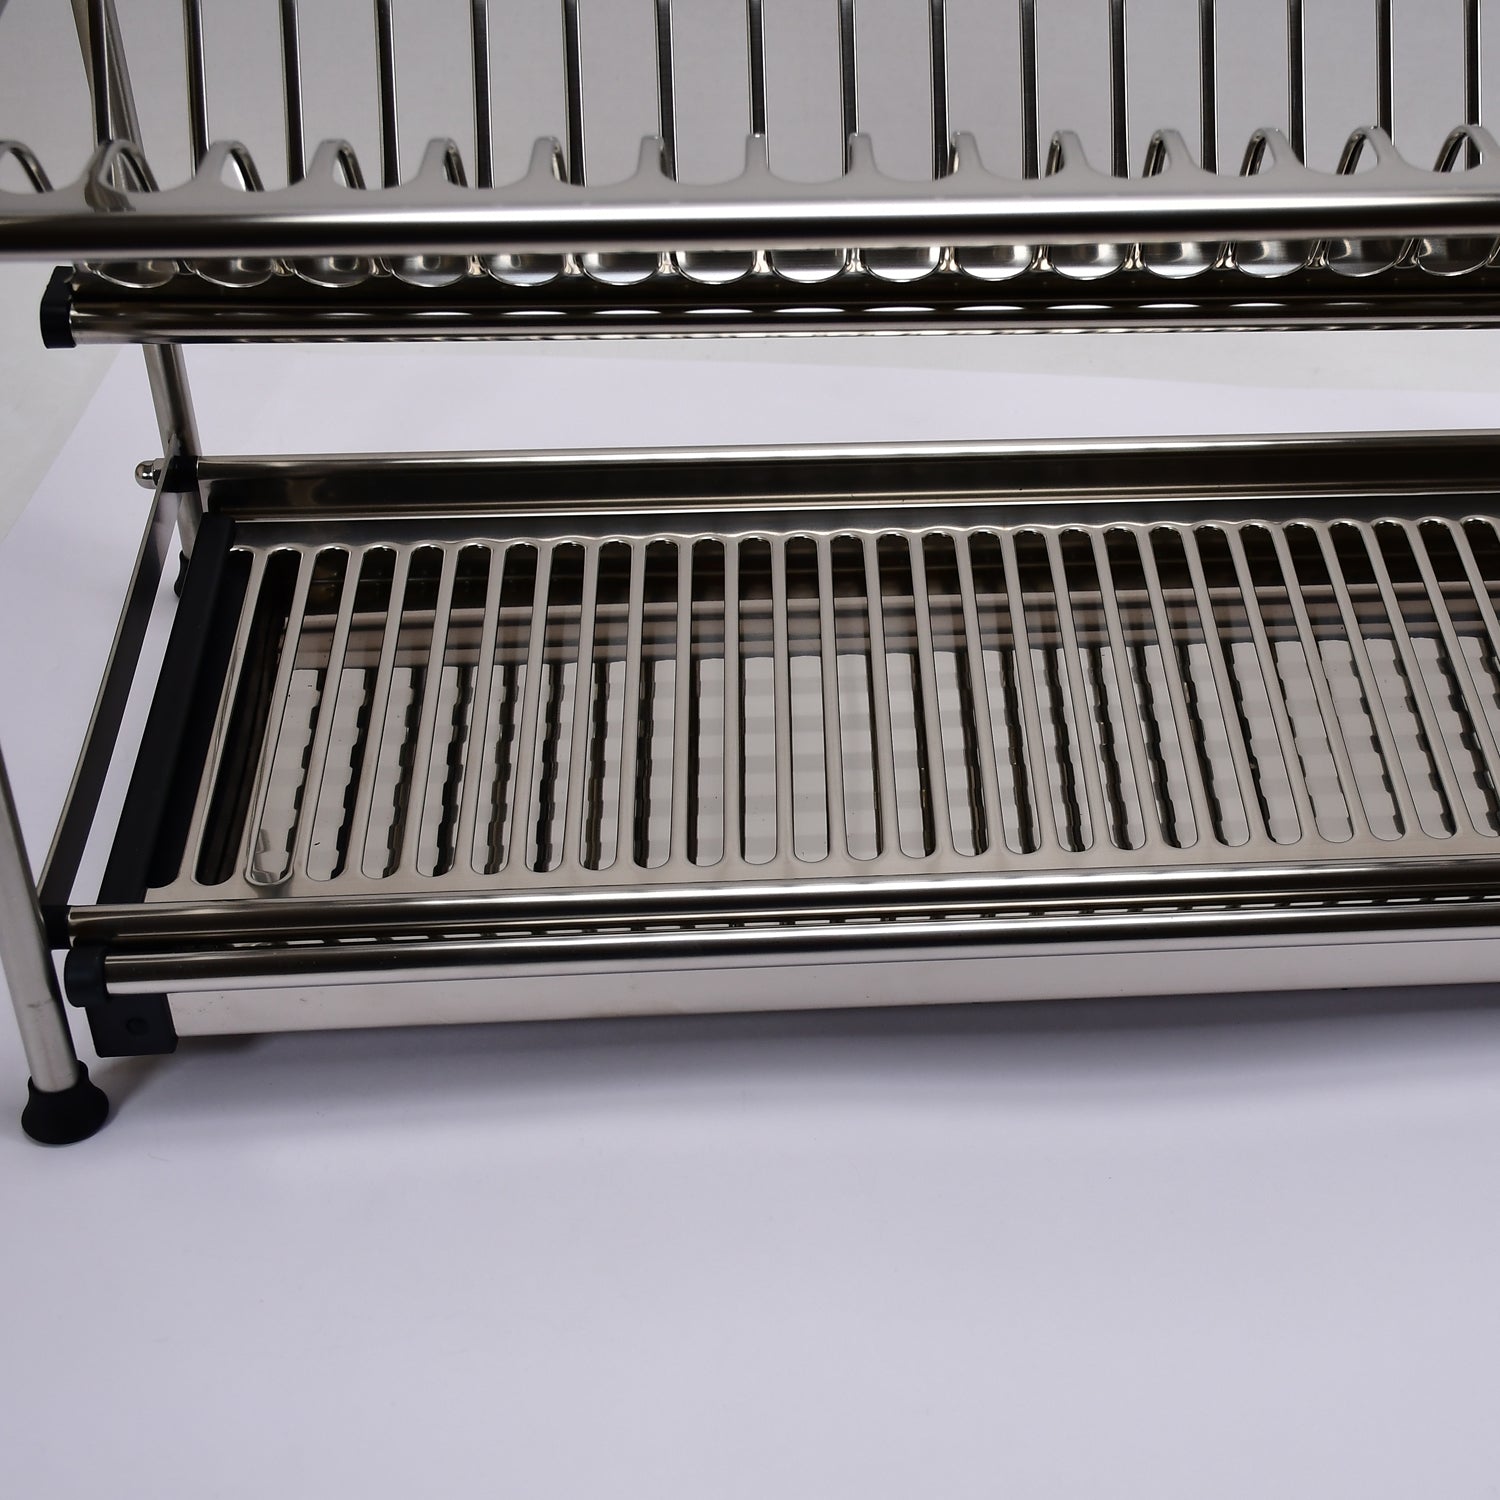 7672 Dish Rack Stainless Steel Rack 2layer Rack For Home & Kitchen Use DeoDap